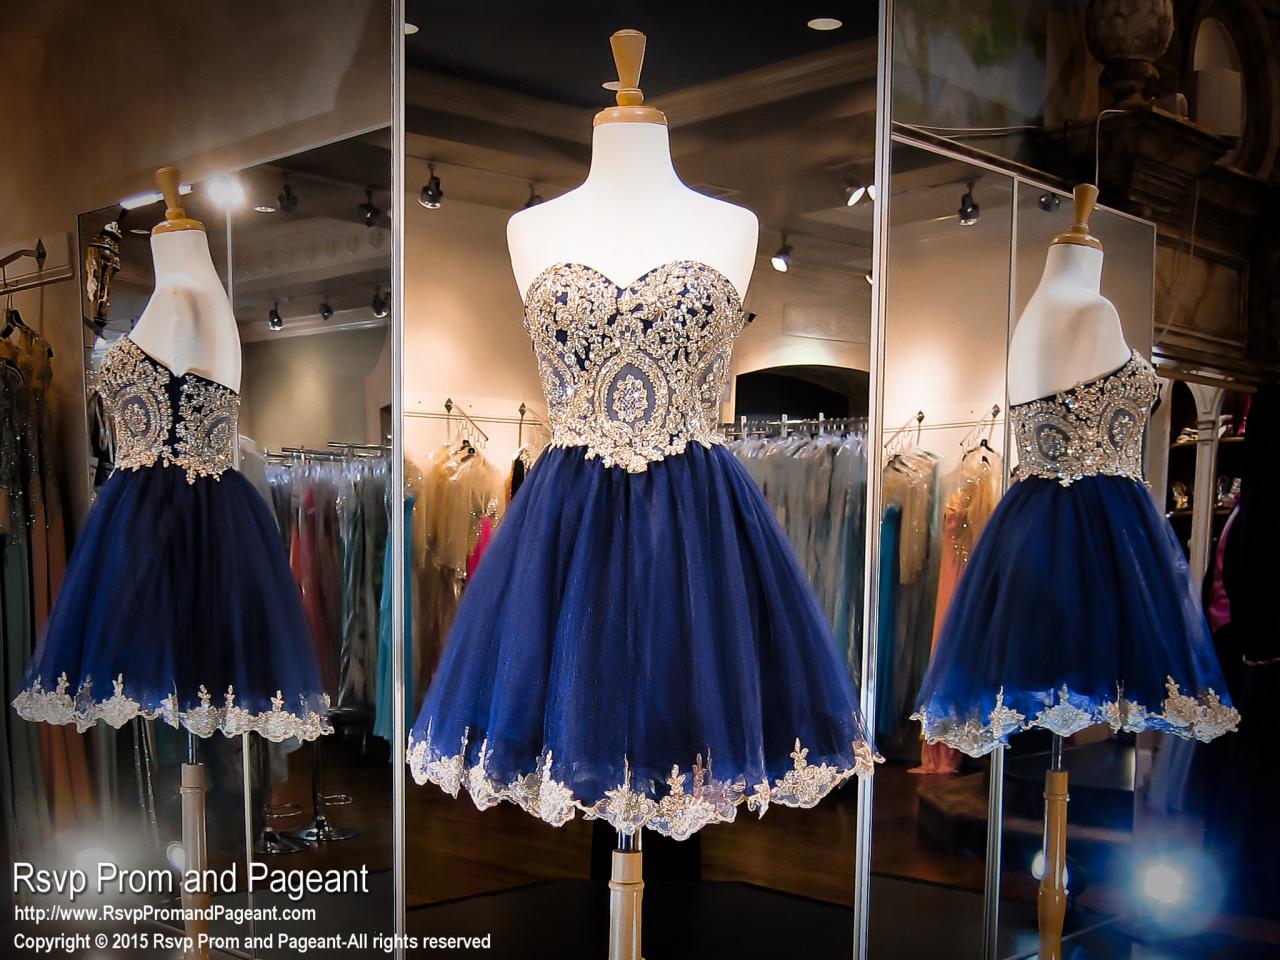 Sweetheart Neck Gold Lace Appliqued Homecoming Dress,navy Blue Tulle Short Prom Dress 1598